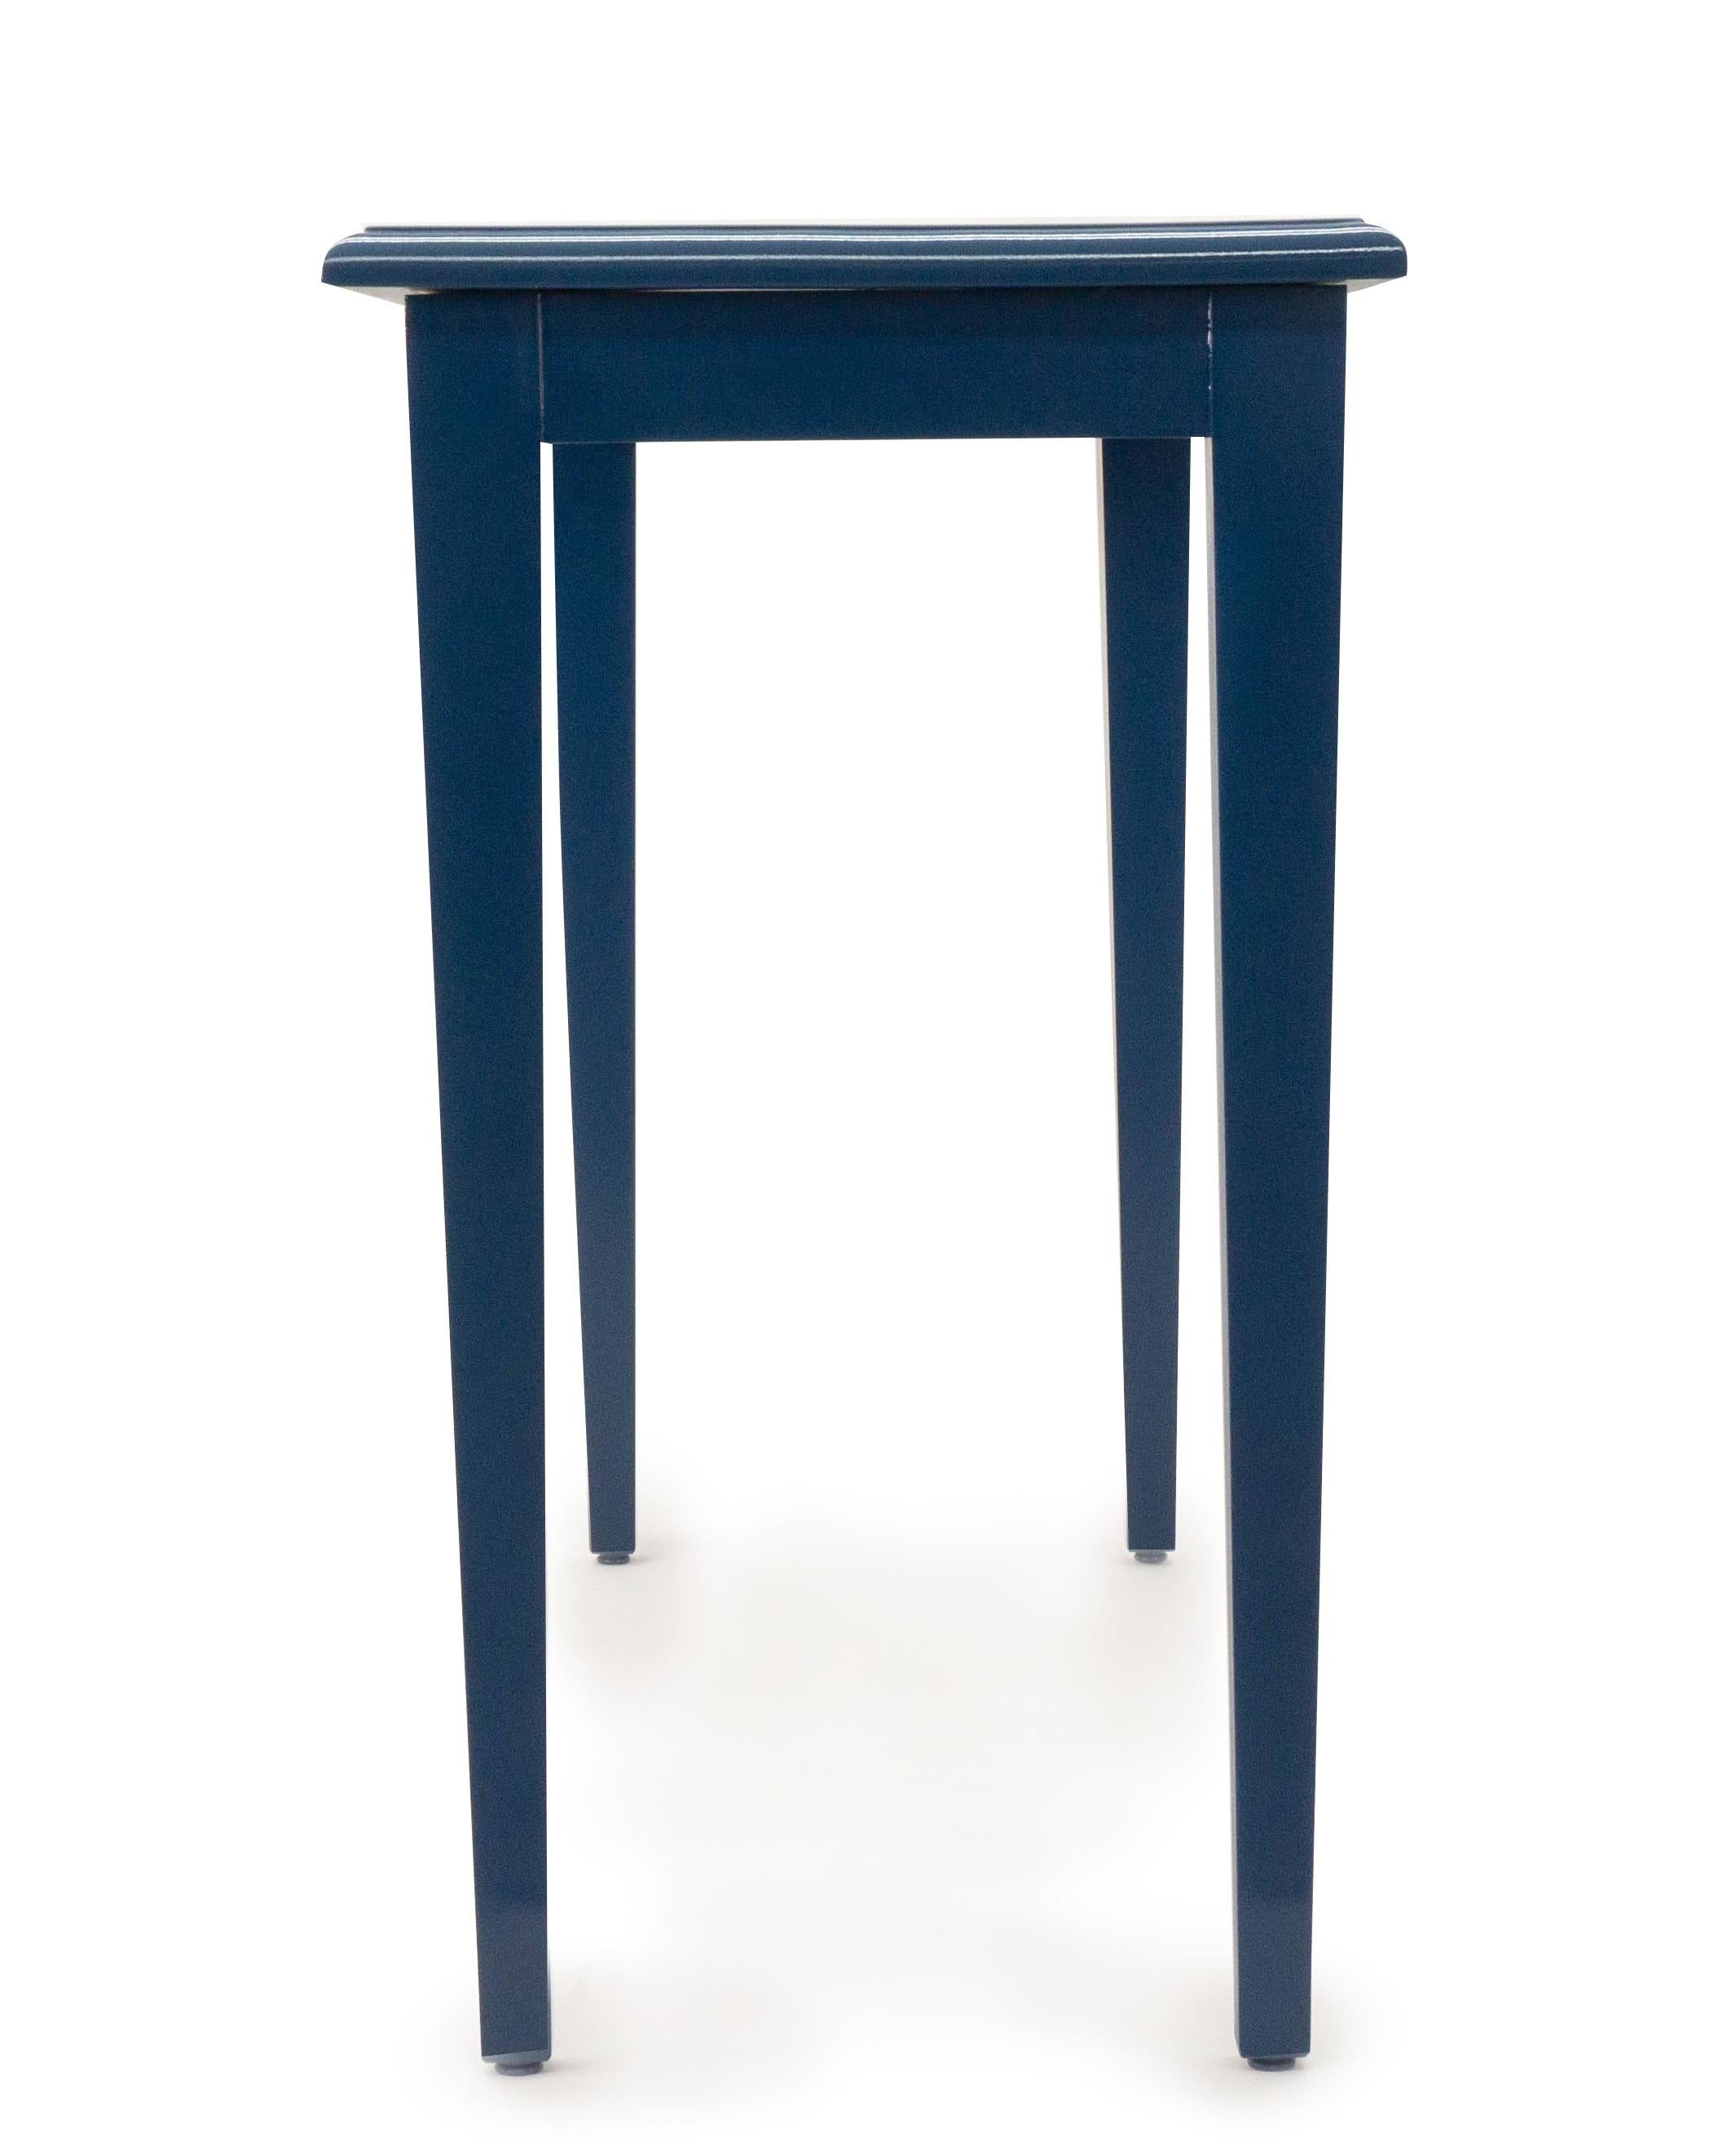 Newly painted console table lacquered in a California blue with tapered legs. 

Customizable sizes and finishes upon request. 

Measurements: 35